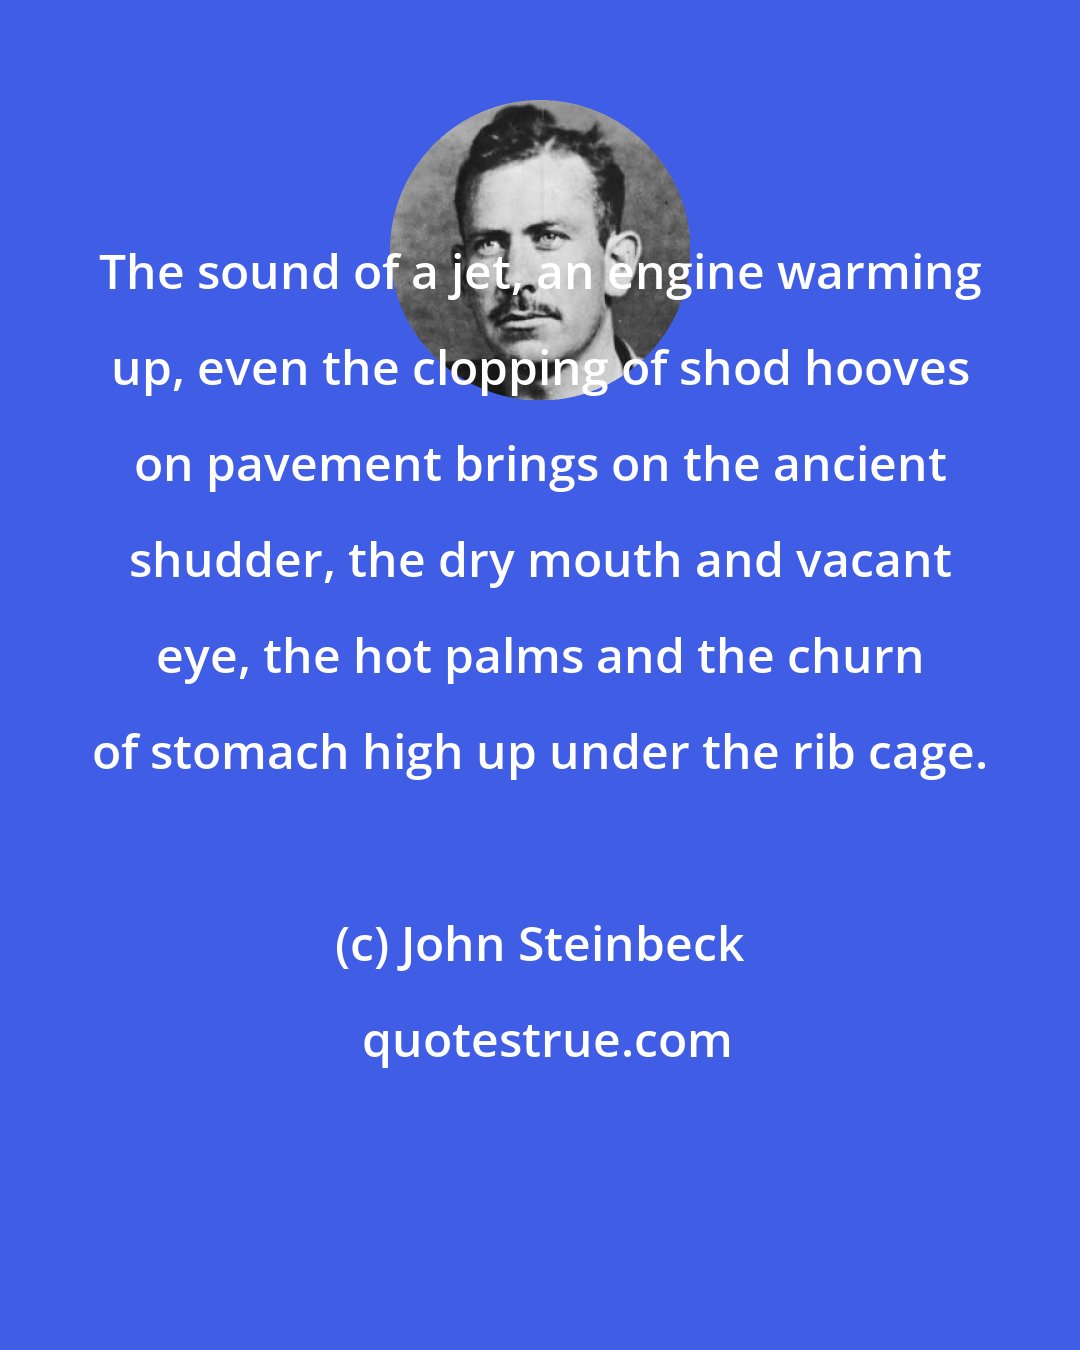 John Steinbeck: The sound of a jet, an engine warming up, even the clopping of shod hooves on pavement brings on the ancient shudder, the dry mouth and vacant eye, the hot palms and the churn of stomach high up under the rib cage.